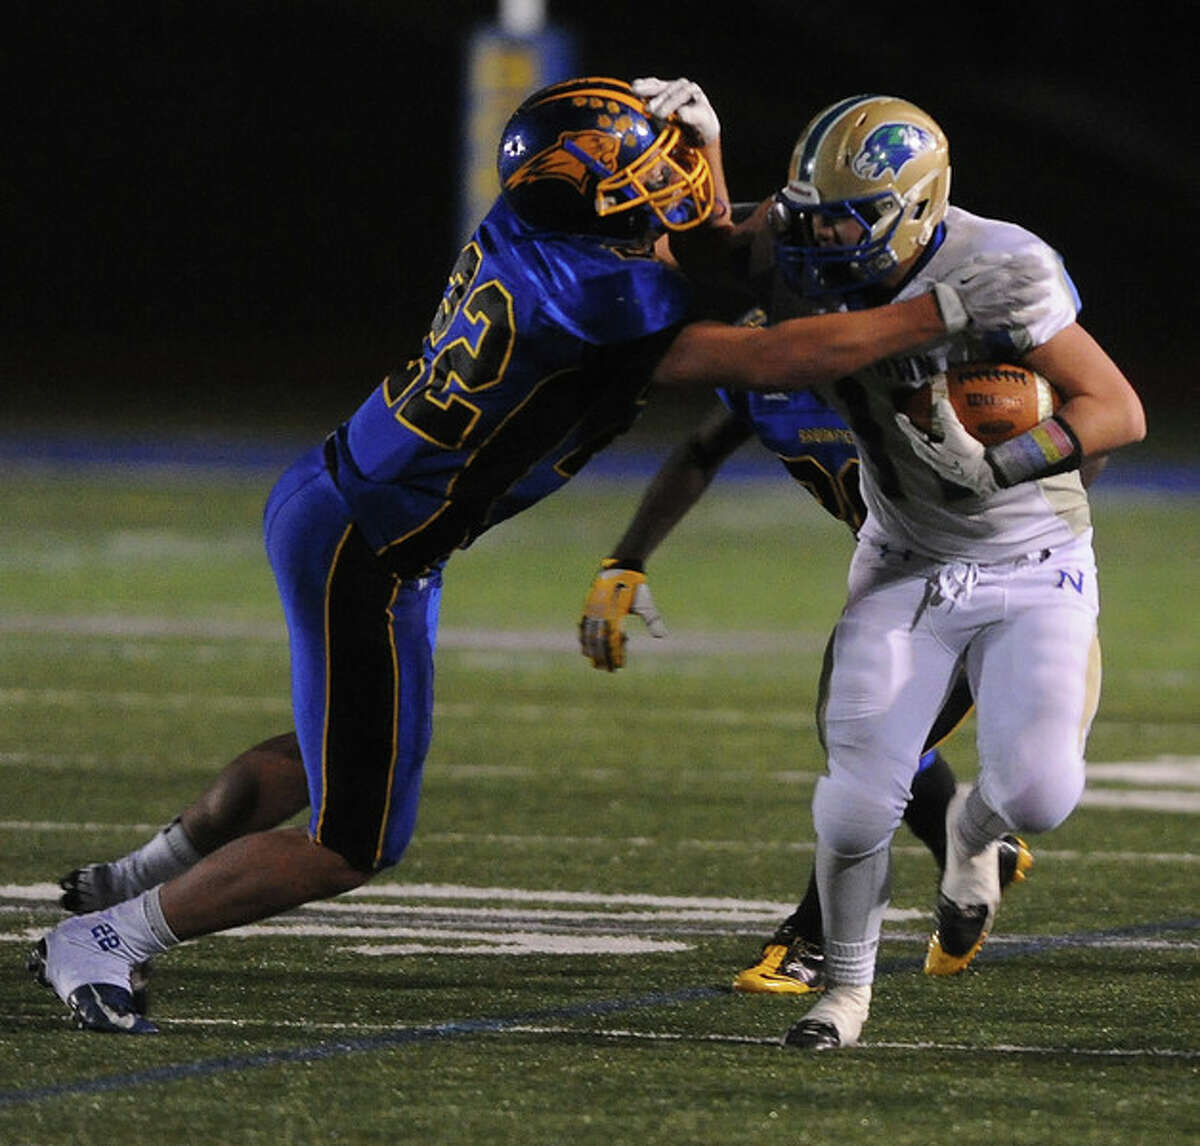 MVP Cooper Gold of Newtown tries to escape the grasp of Brookfield’s Liam Clancy in the SWC title game. (Photo Mara Lavitt)